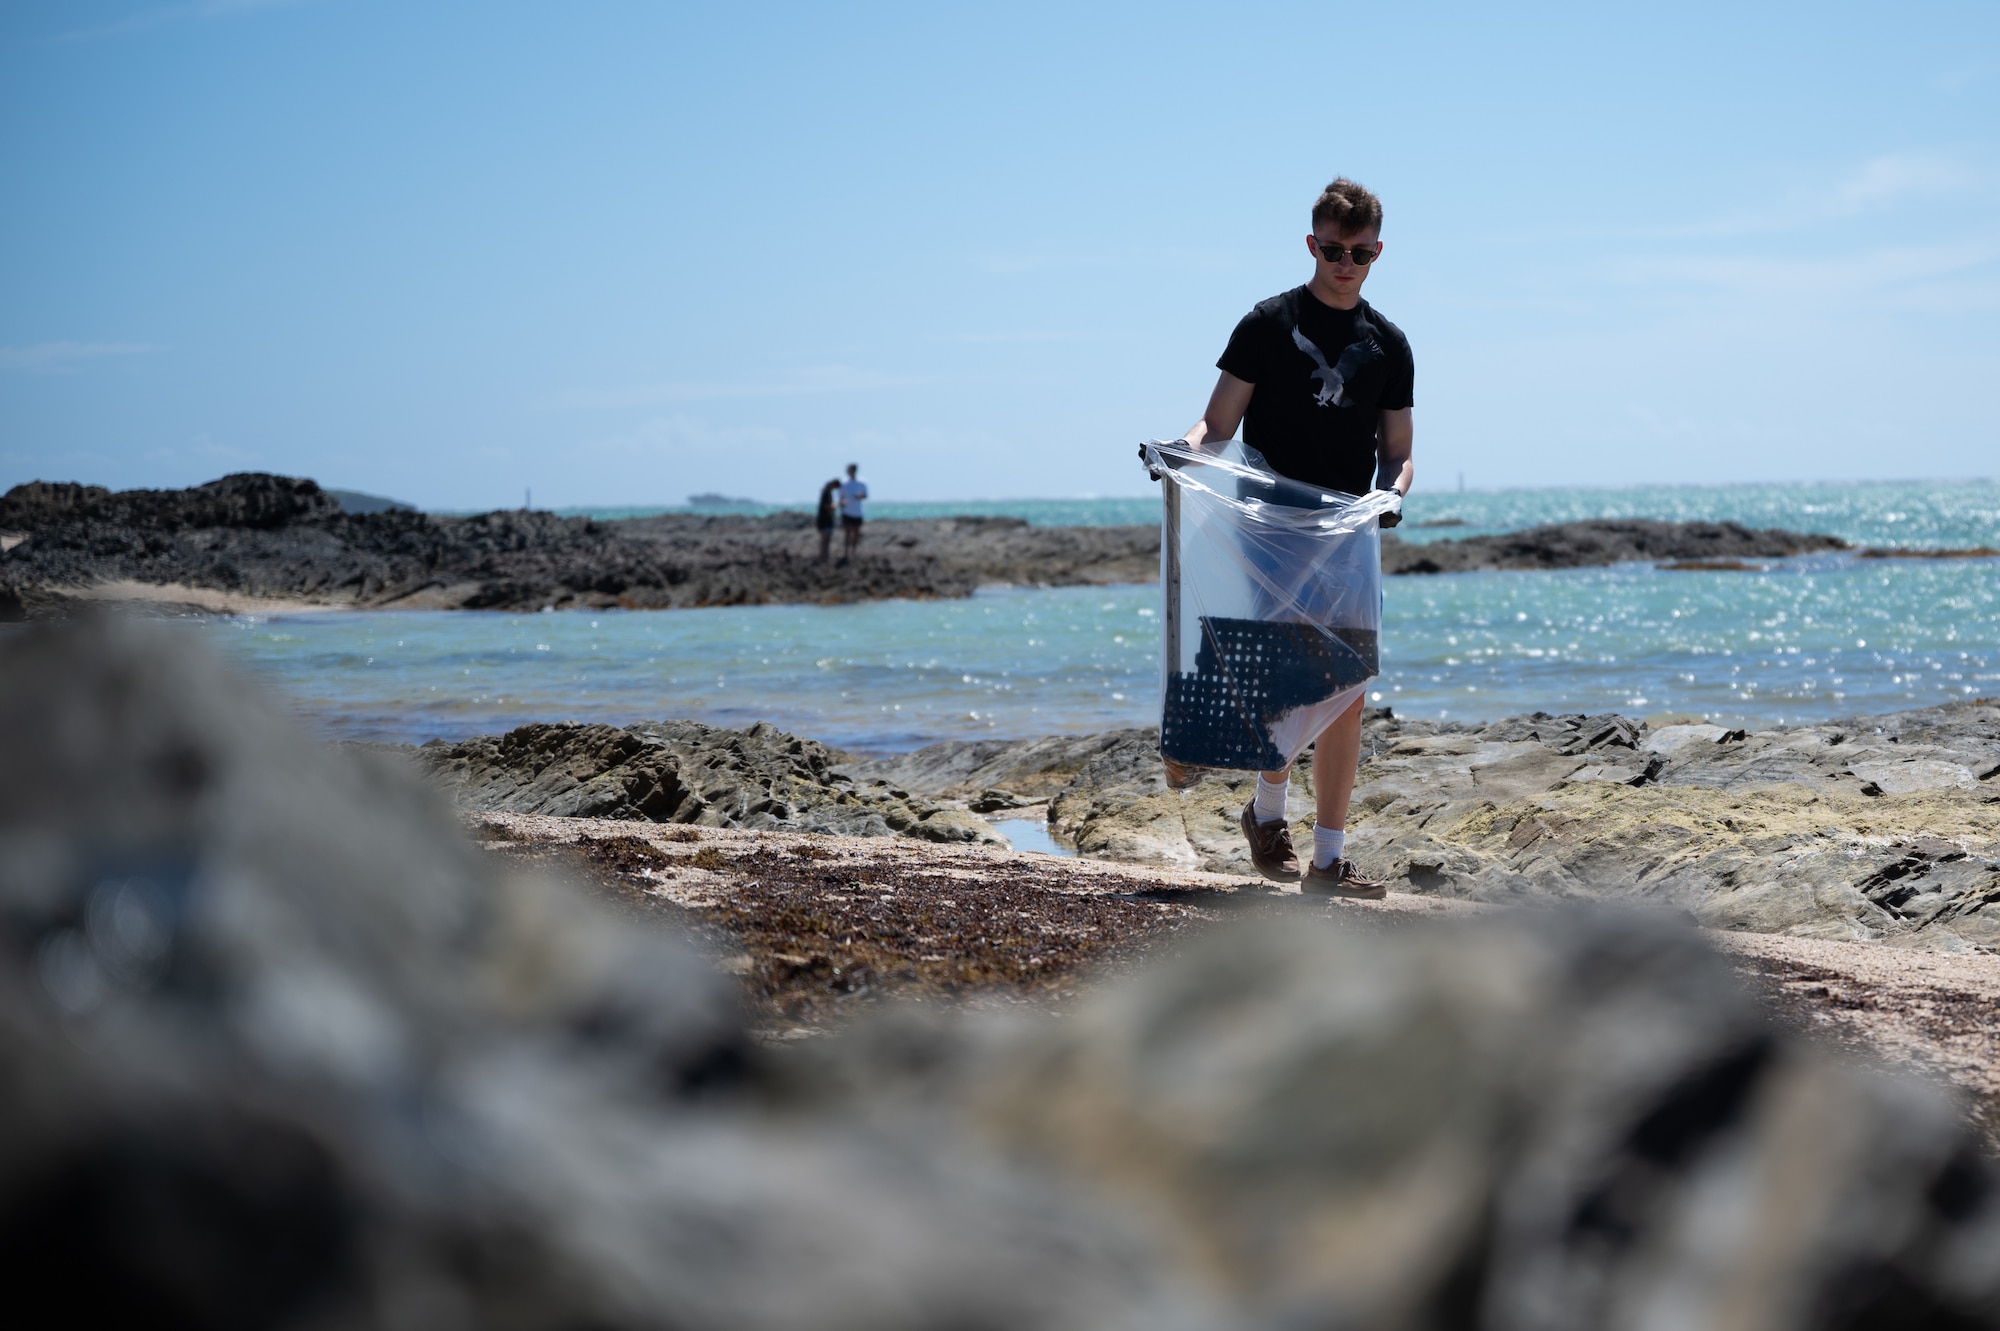 U.S. Air Force Airman Gavin Mattingly, 718th Force Support Squadron force management technician, picks up garbage at Seaglass Beach on Okinawa, Japan, Aug. 21, 2021. Globally, over 300-thousand volunteers come out to help clean up beaches annually; this beach clean-up removed over one hundred pounds of trash from the beach. (U.S. Air Force photo by Airman 1st Class Stephen Pulter)